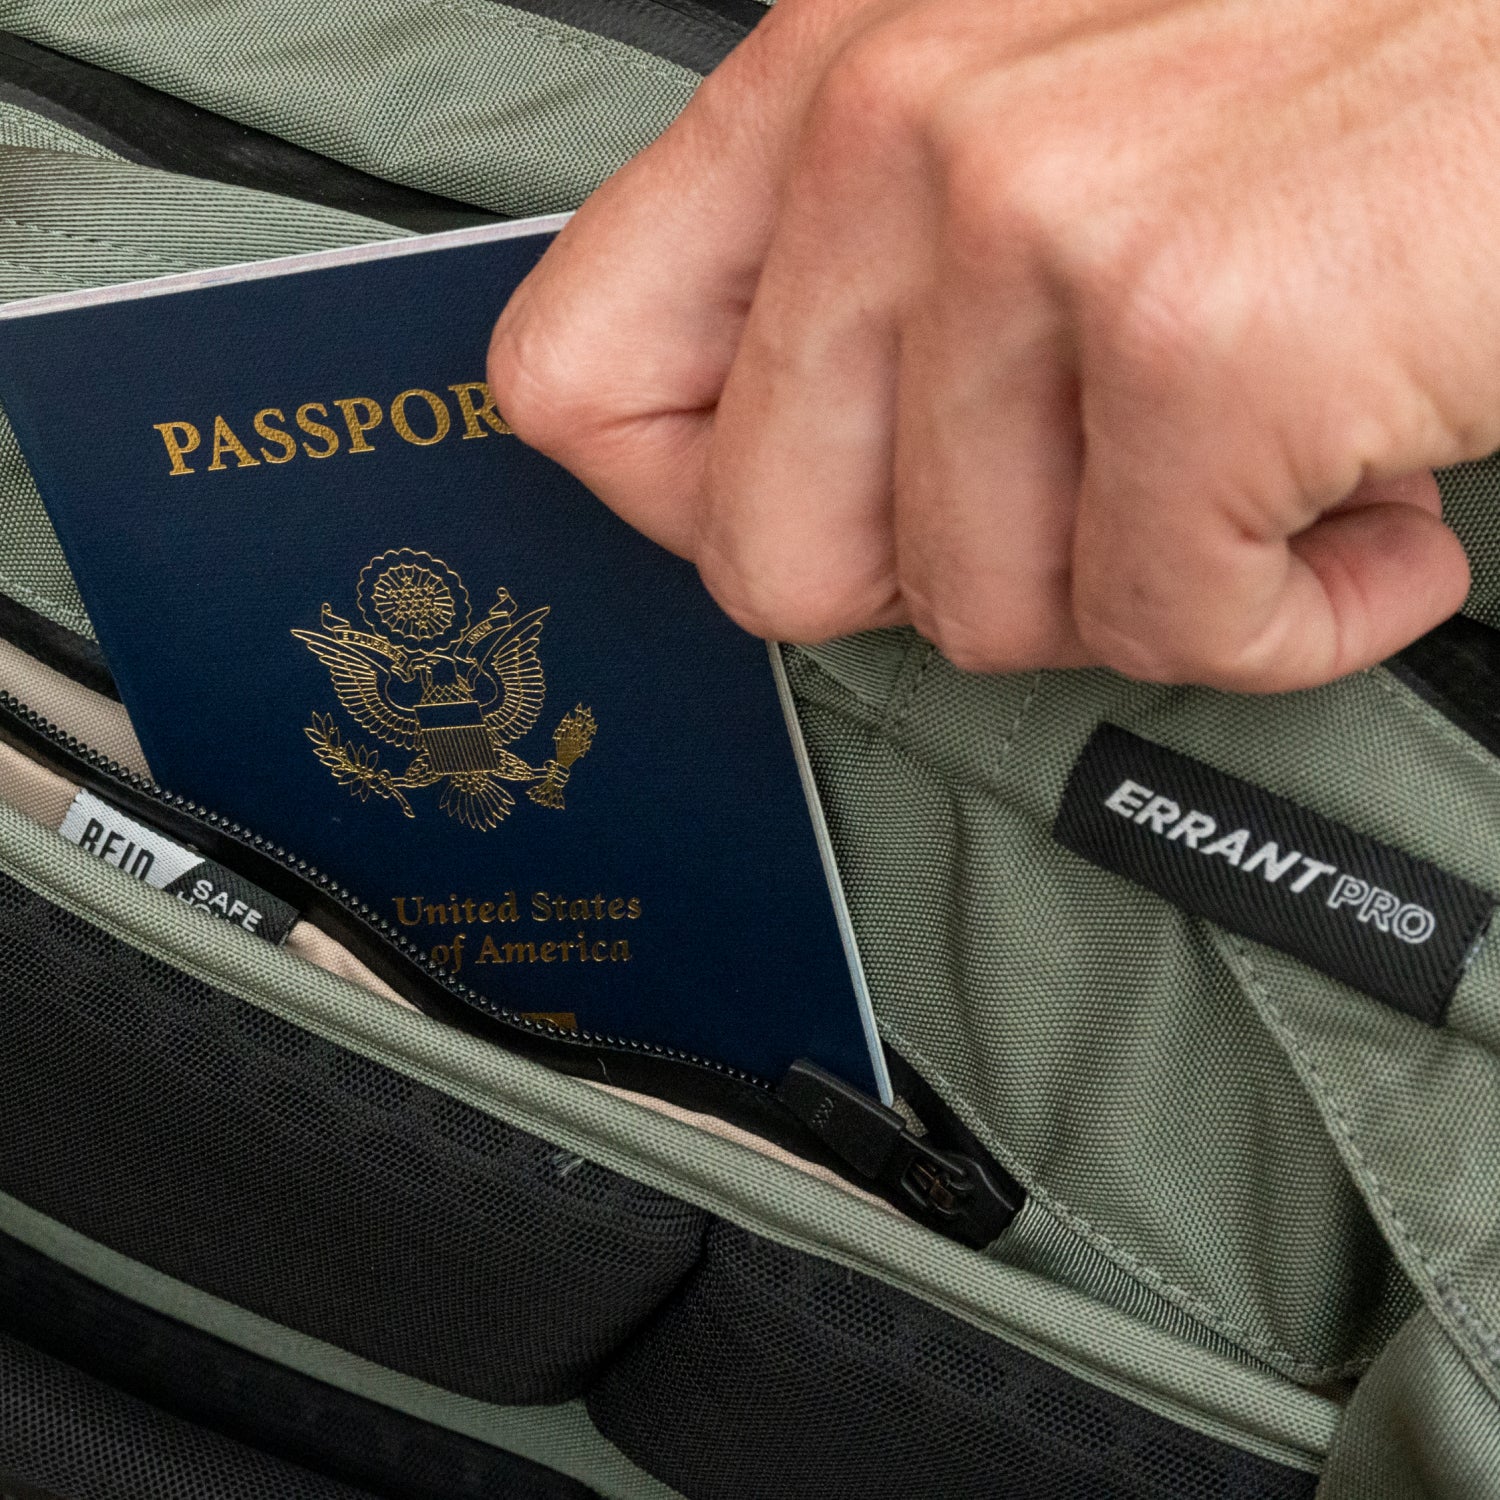 A man slides his passport into his Errant Pro travel backpack.